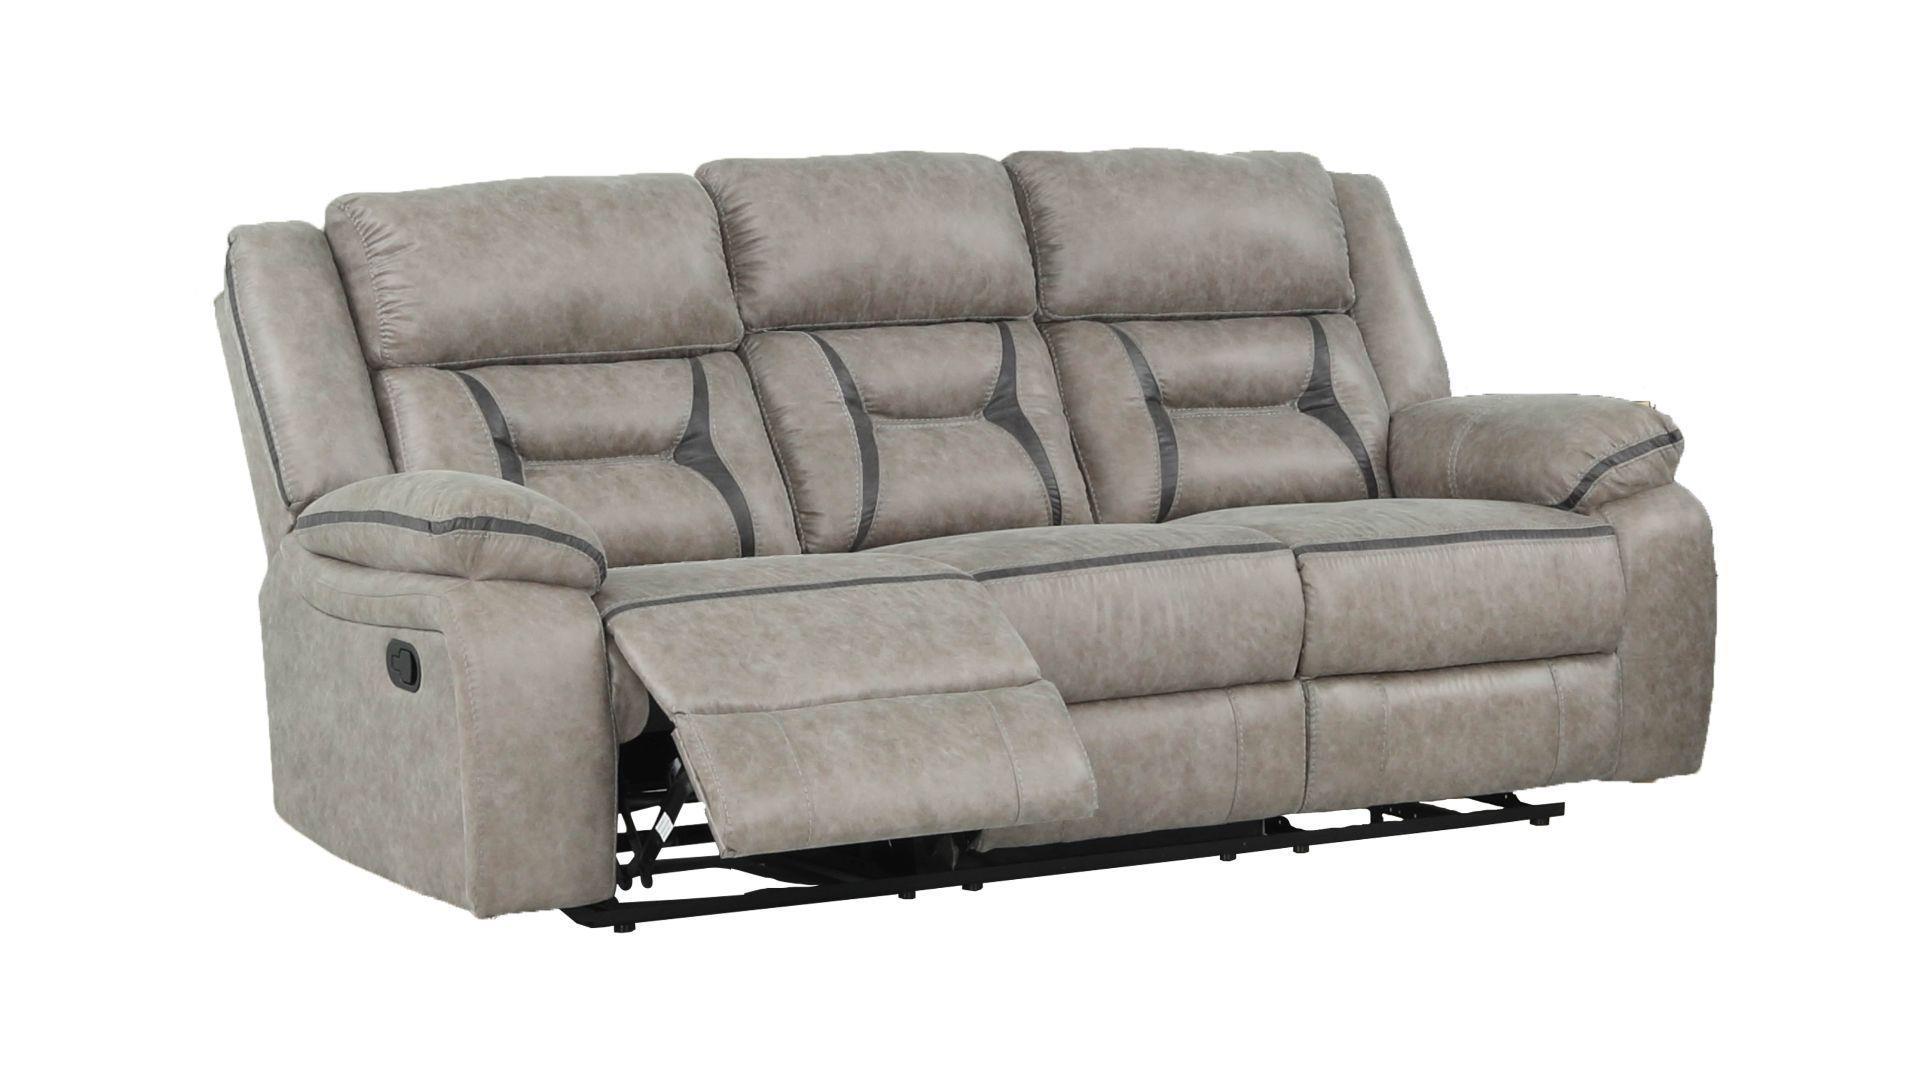 Contemporary, Modern Recliner Sofa DENALI 698781075210 in Gray Faux Leather